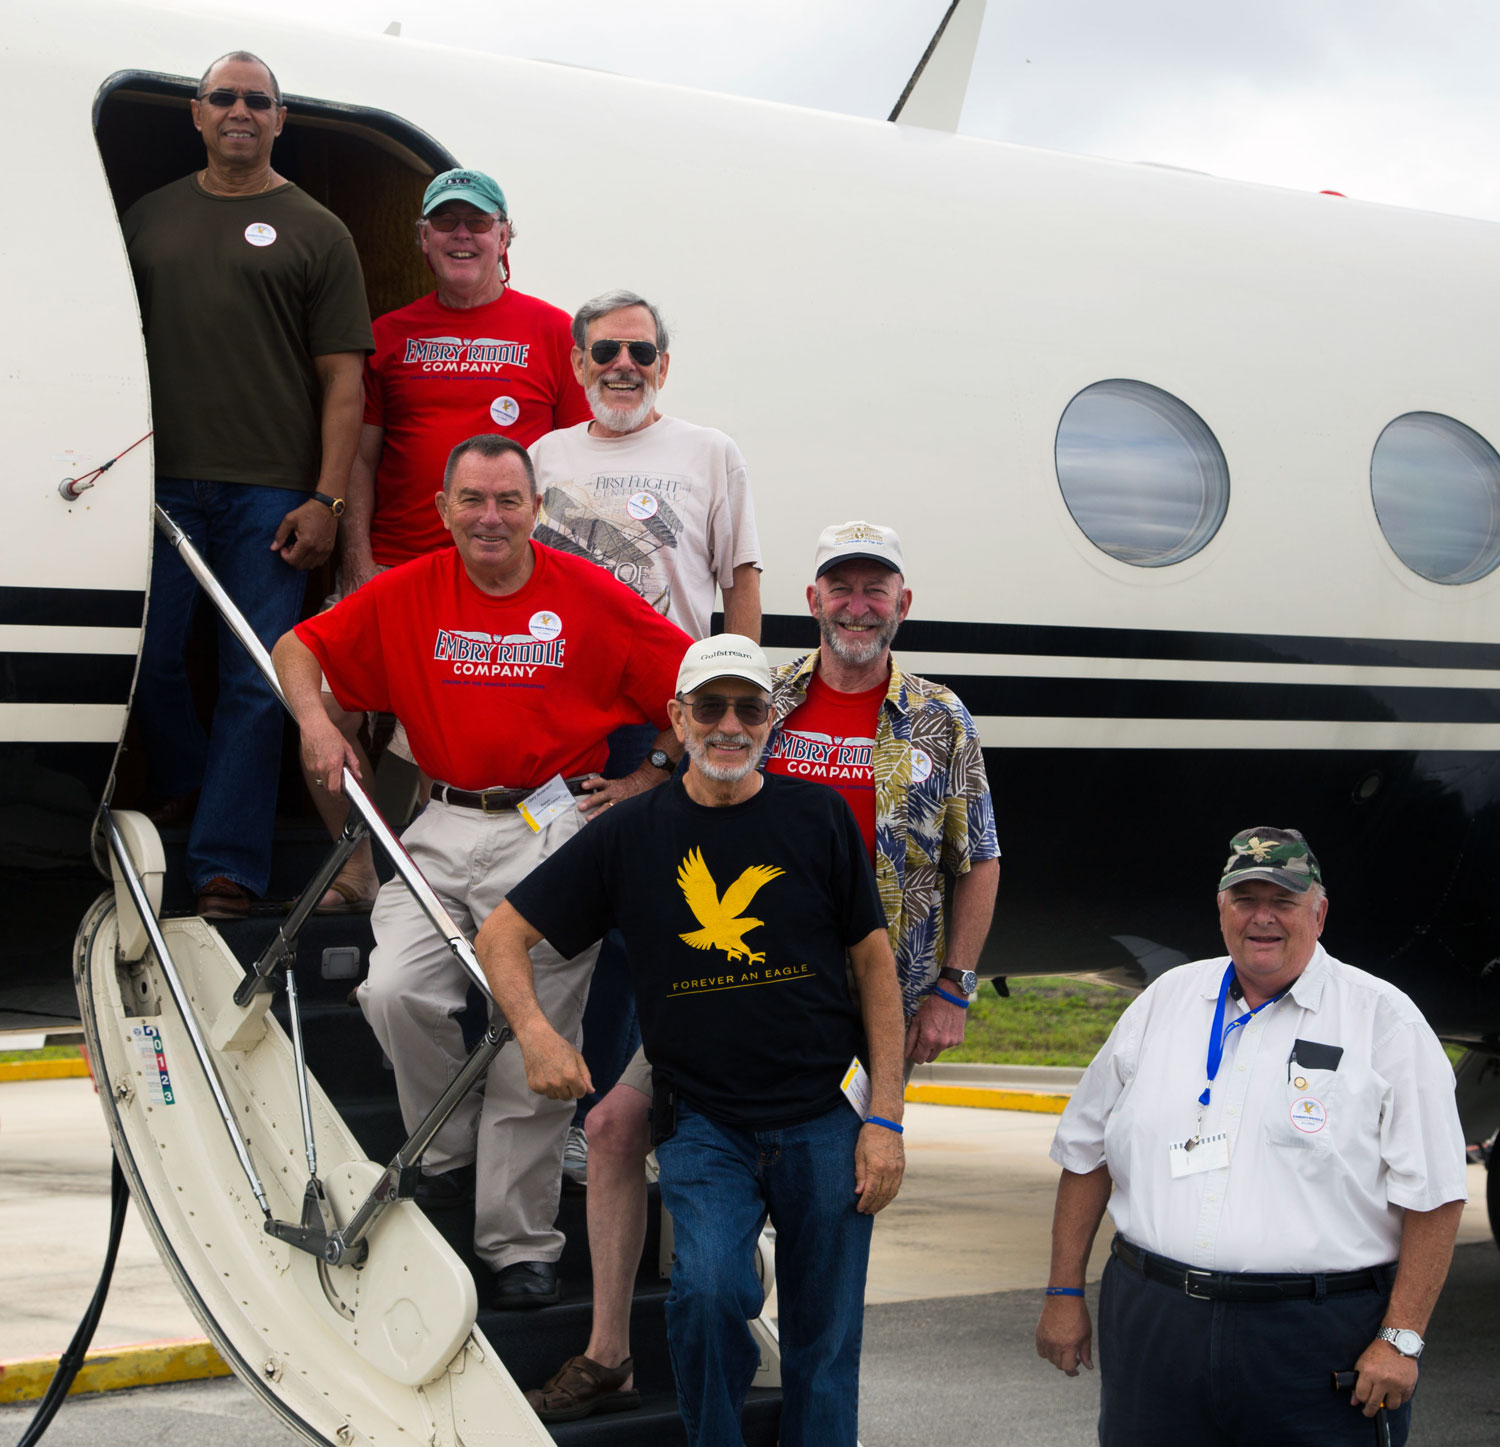 Alumni members of the Alpha Eta Rho professional aviation fraternity enjoy the Fly-In Static Display. (Chris DeAugustine photo)